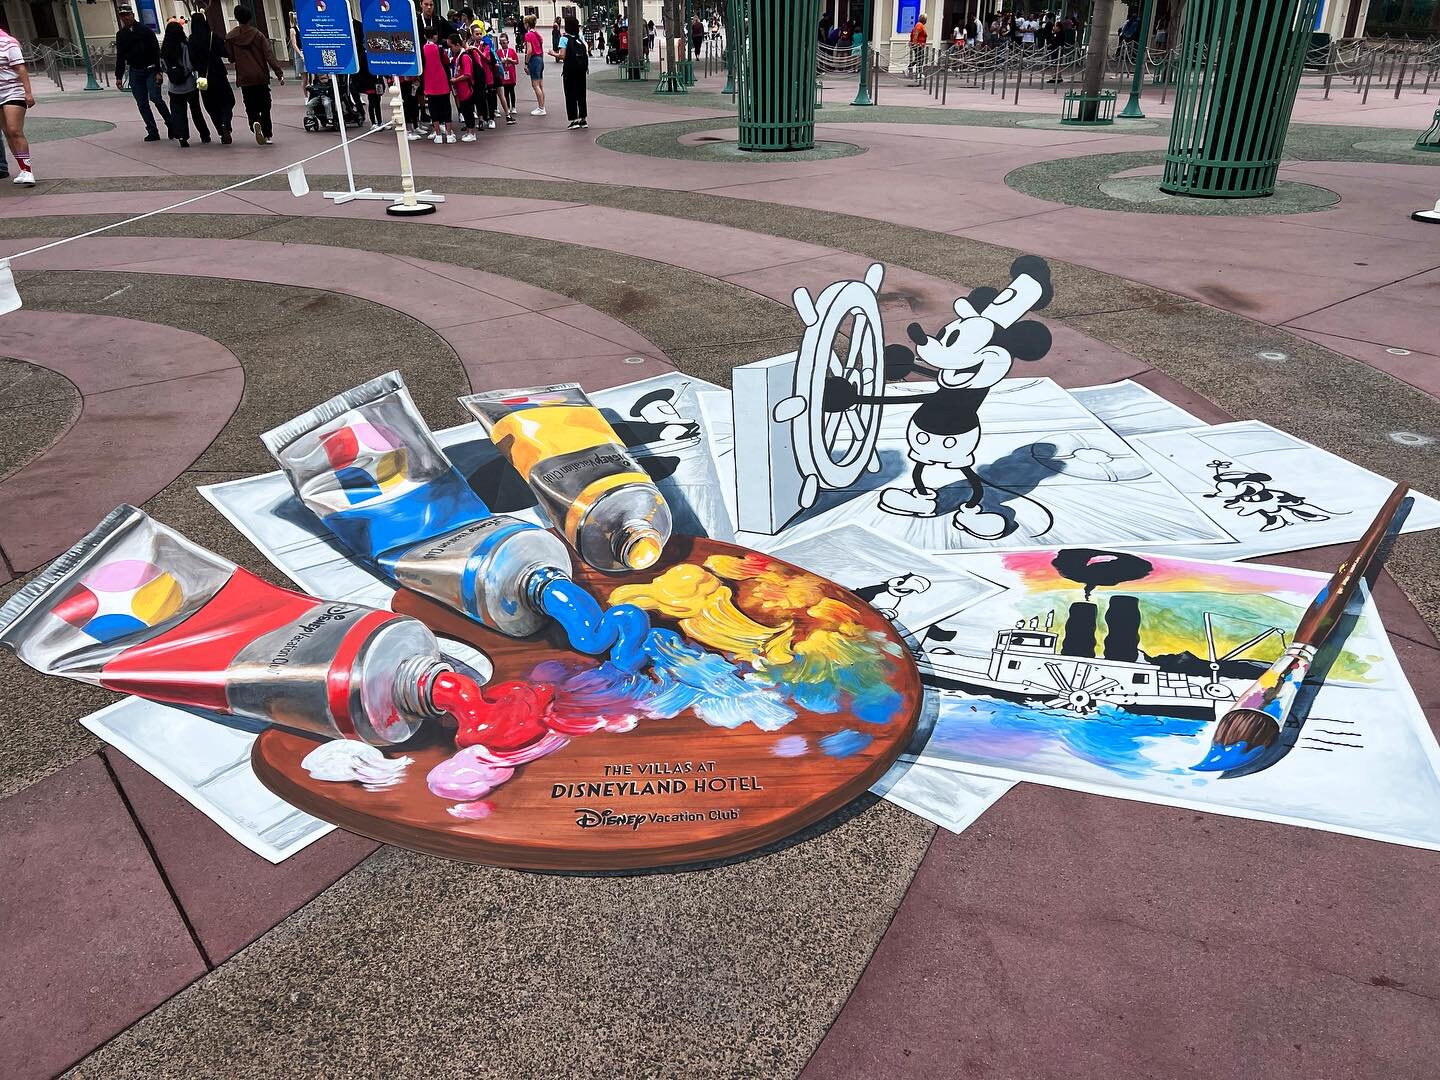 I&rsquo;m thrilled to partner with @disneyland and @disneyvacationclub in making this Steamboat Willie inspired 3D painting. Special thanks to @evergalvezartist for helping on this one!  It is surreal to bring such an iconic character to life!!